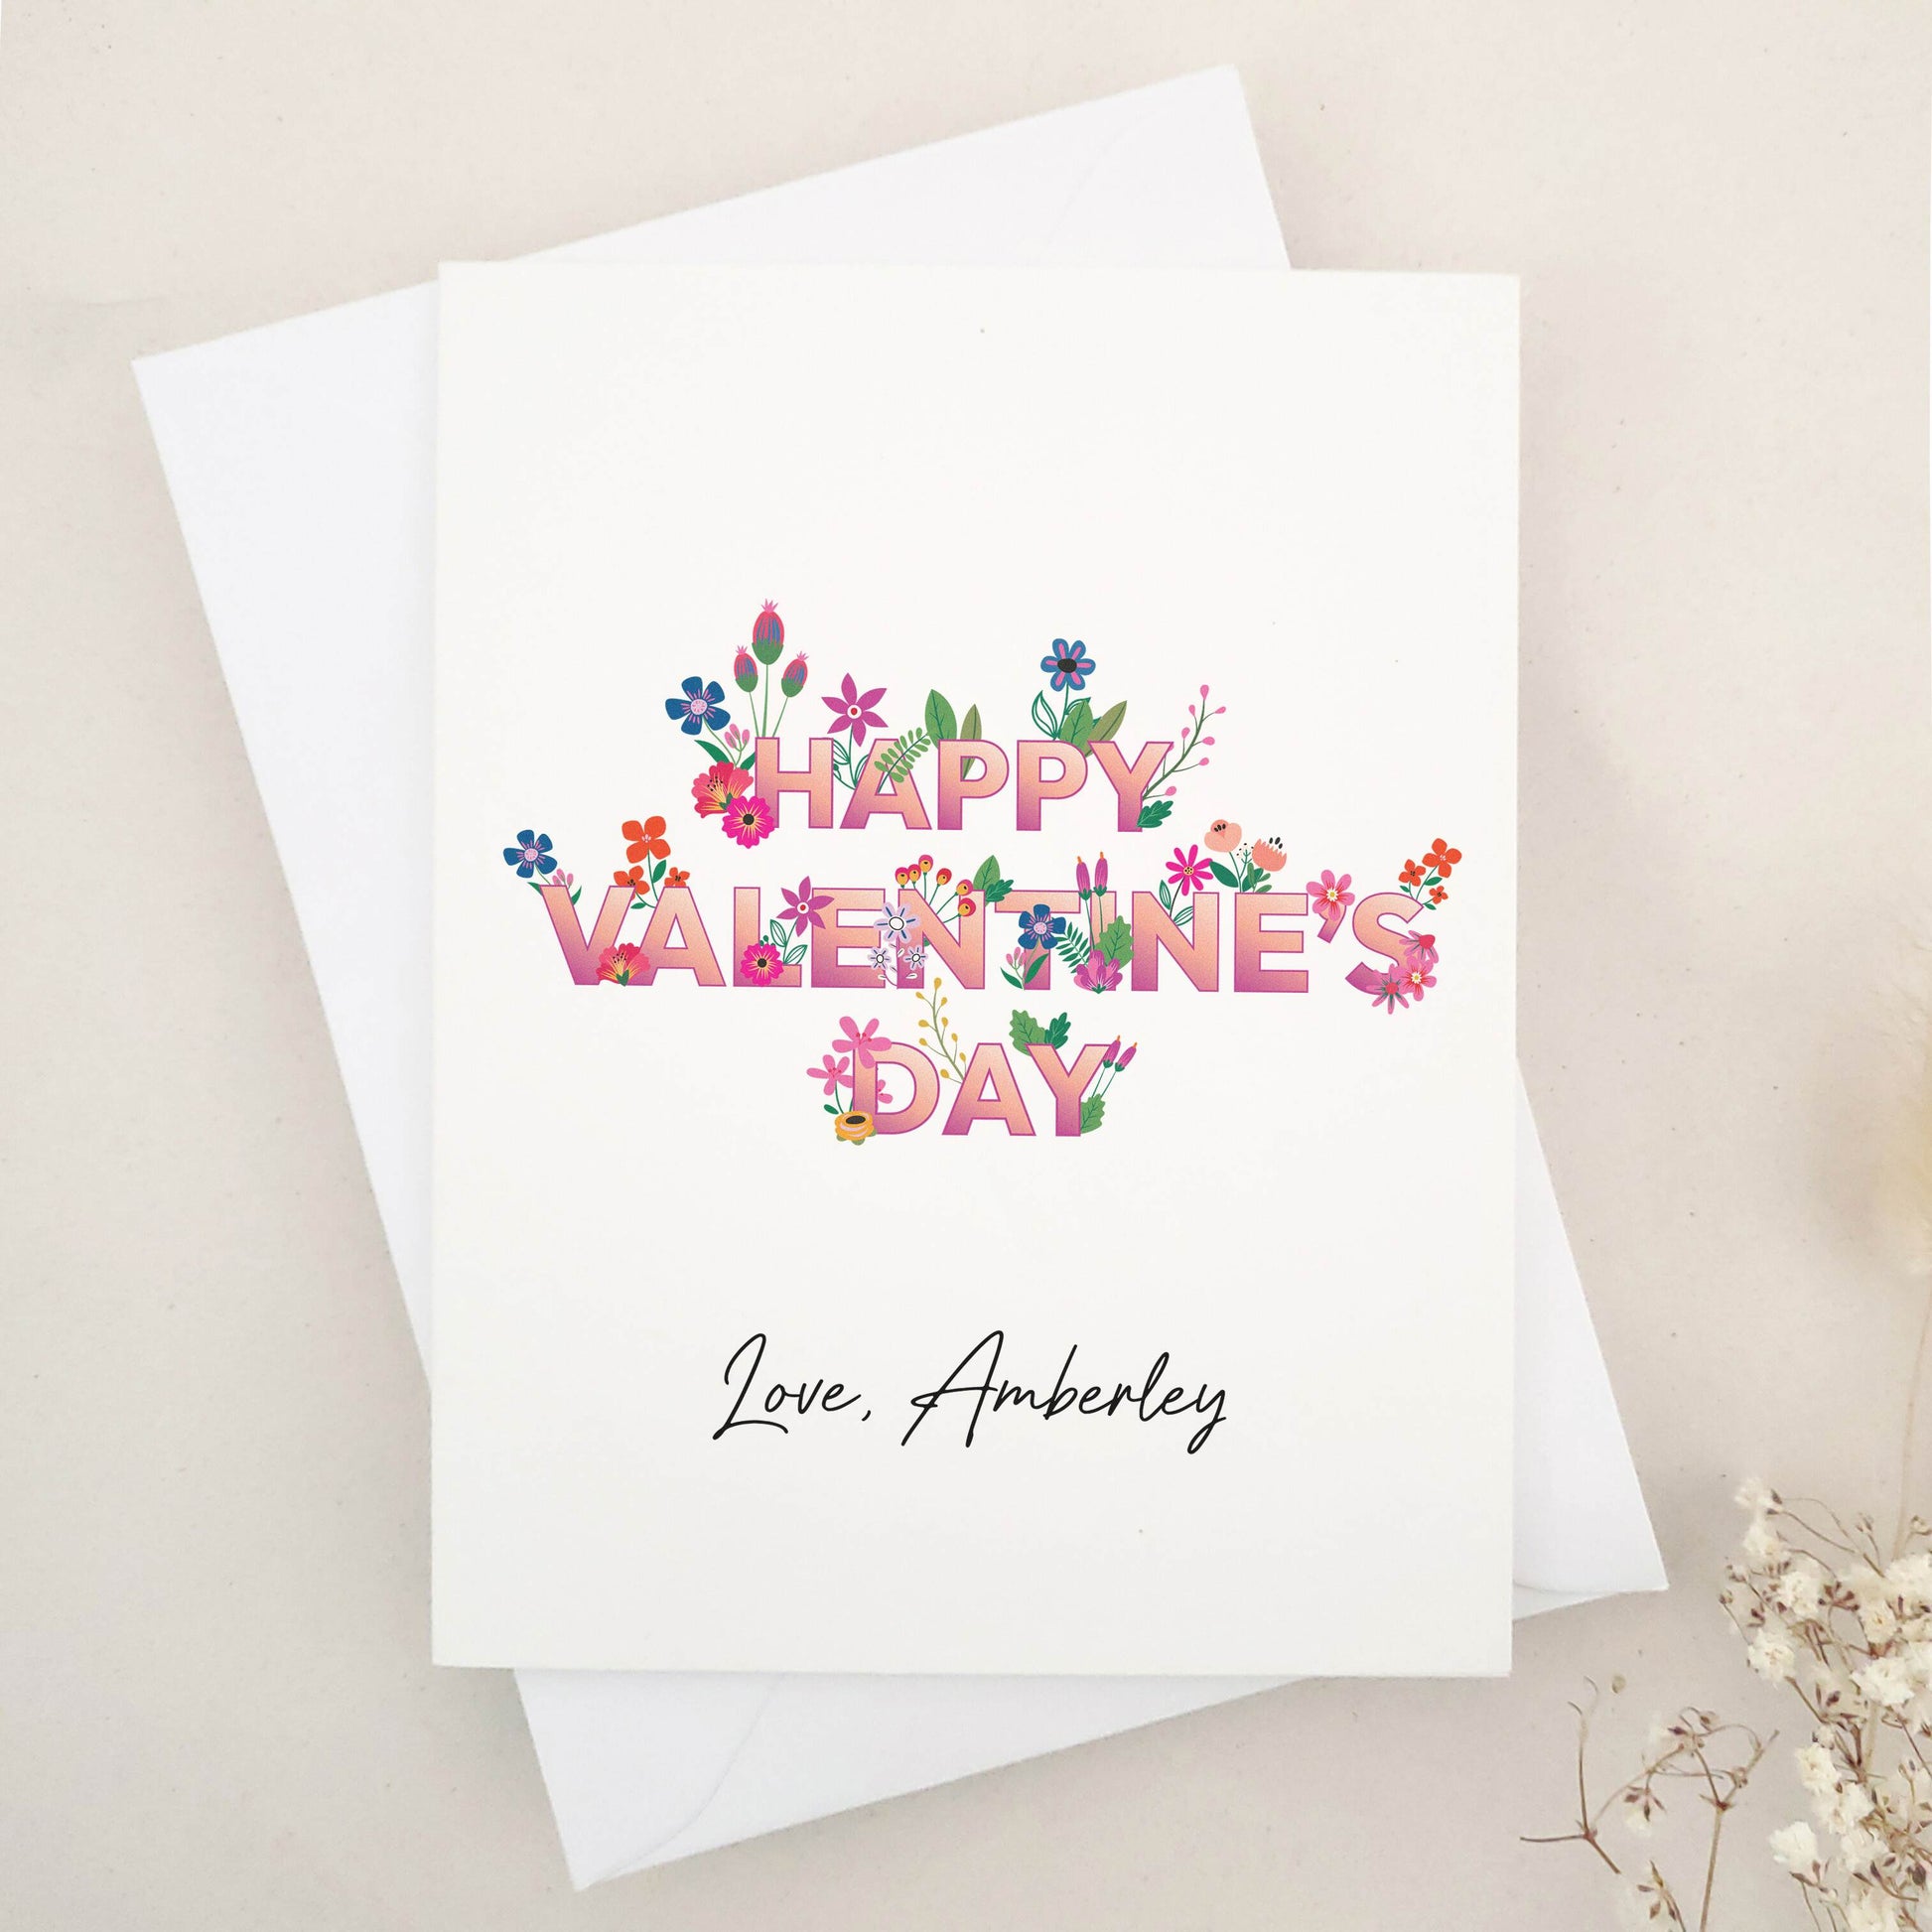 Celebrate Valentine's Day with our stunning Happy Valentine's Day cards, perfect for sharing heartfelt wishes with your best friend, girlfriend, or boyfriend. The design features an elegant blend of floral elements, bold typography, and calligraphy-style signature, symbolizing love and affection.